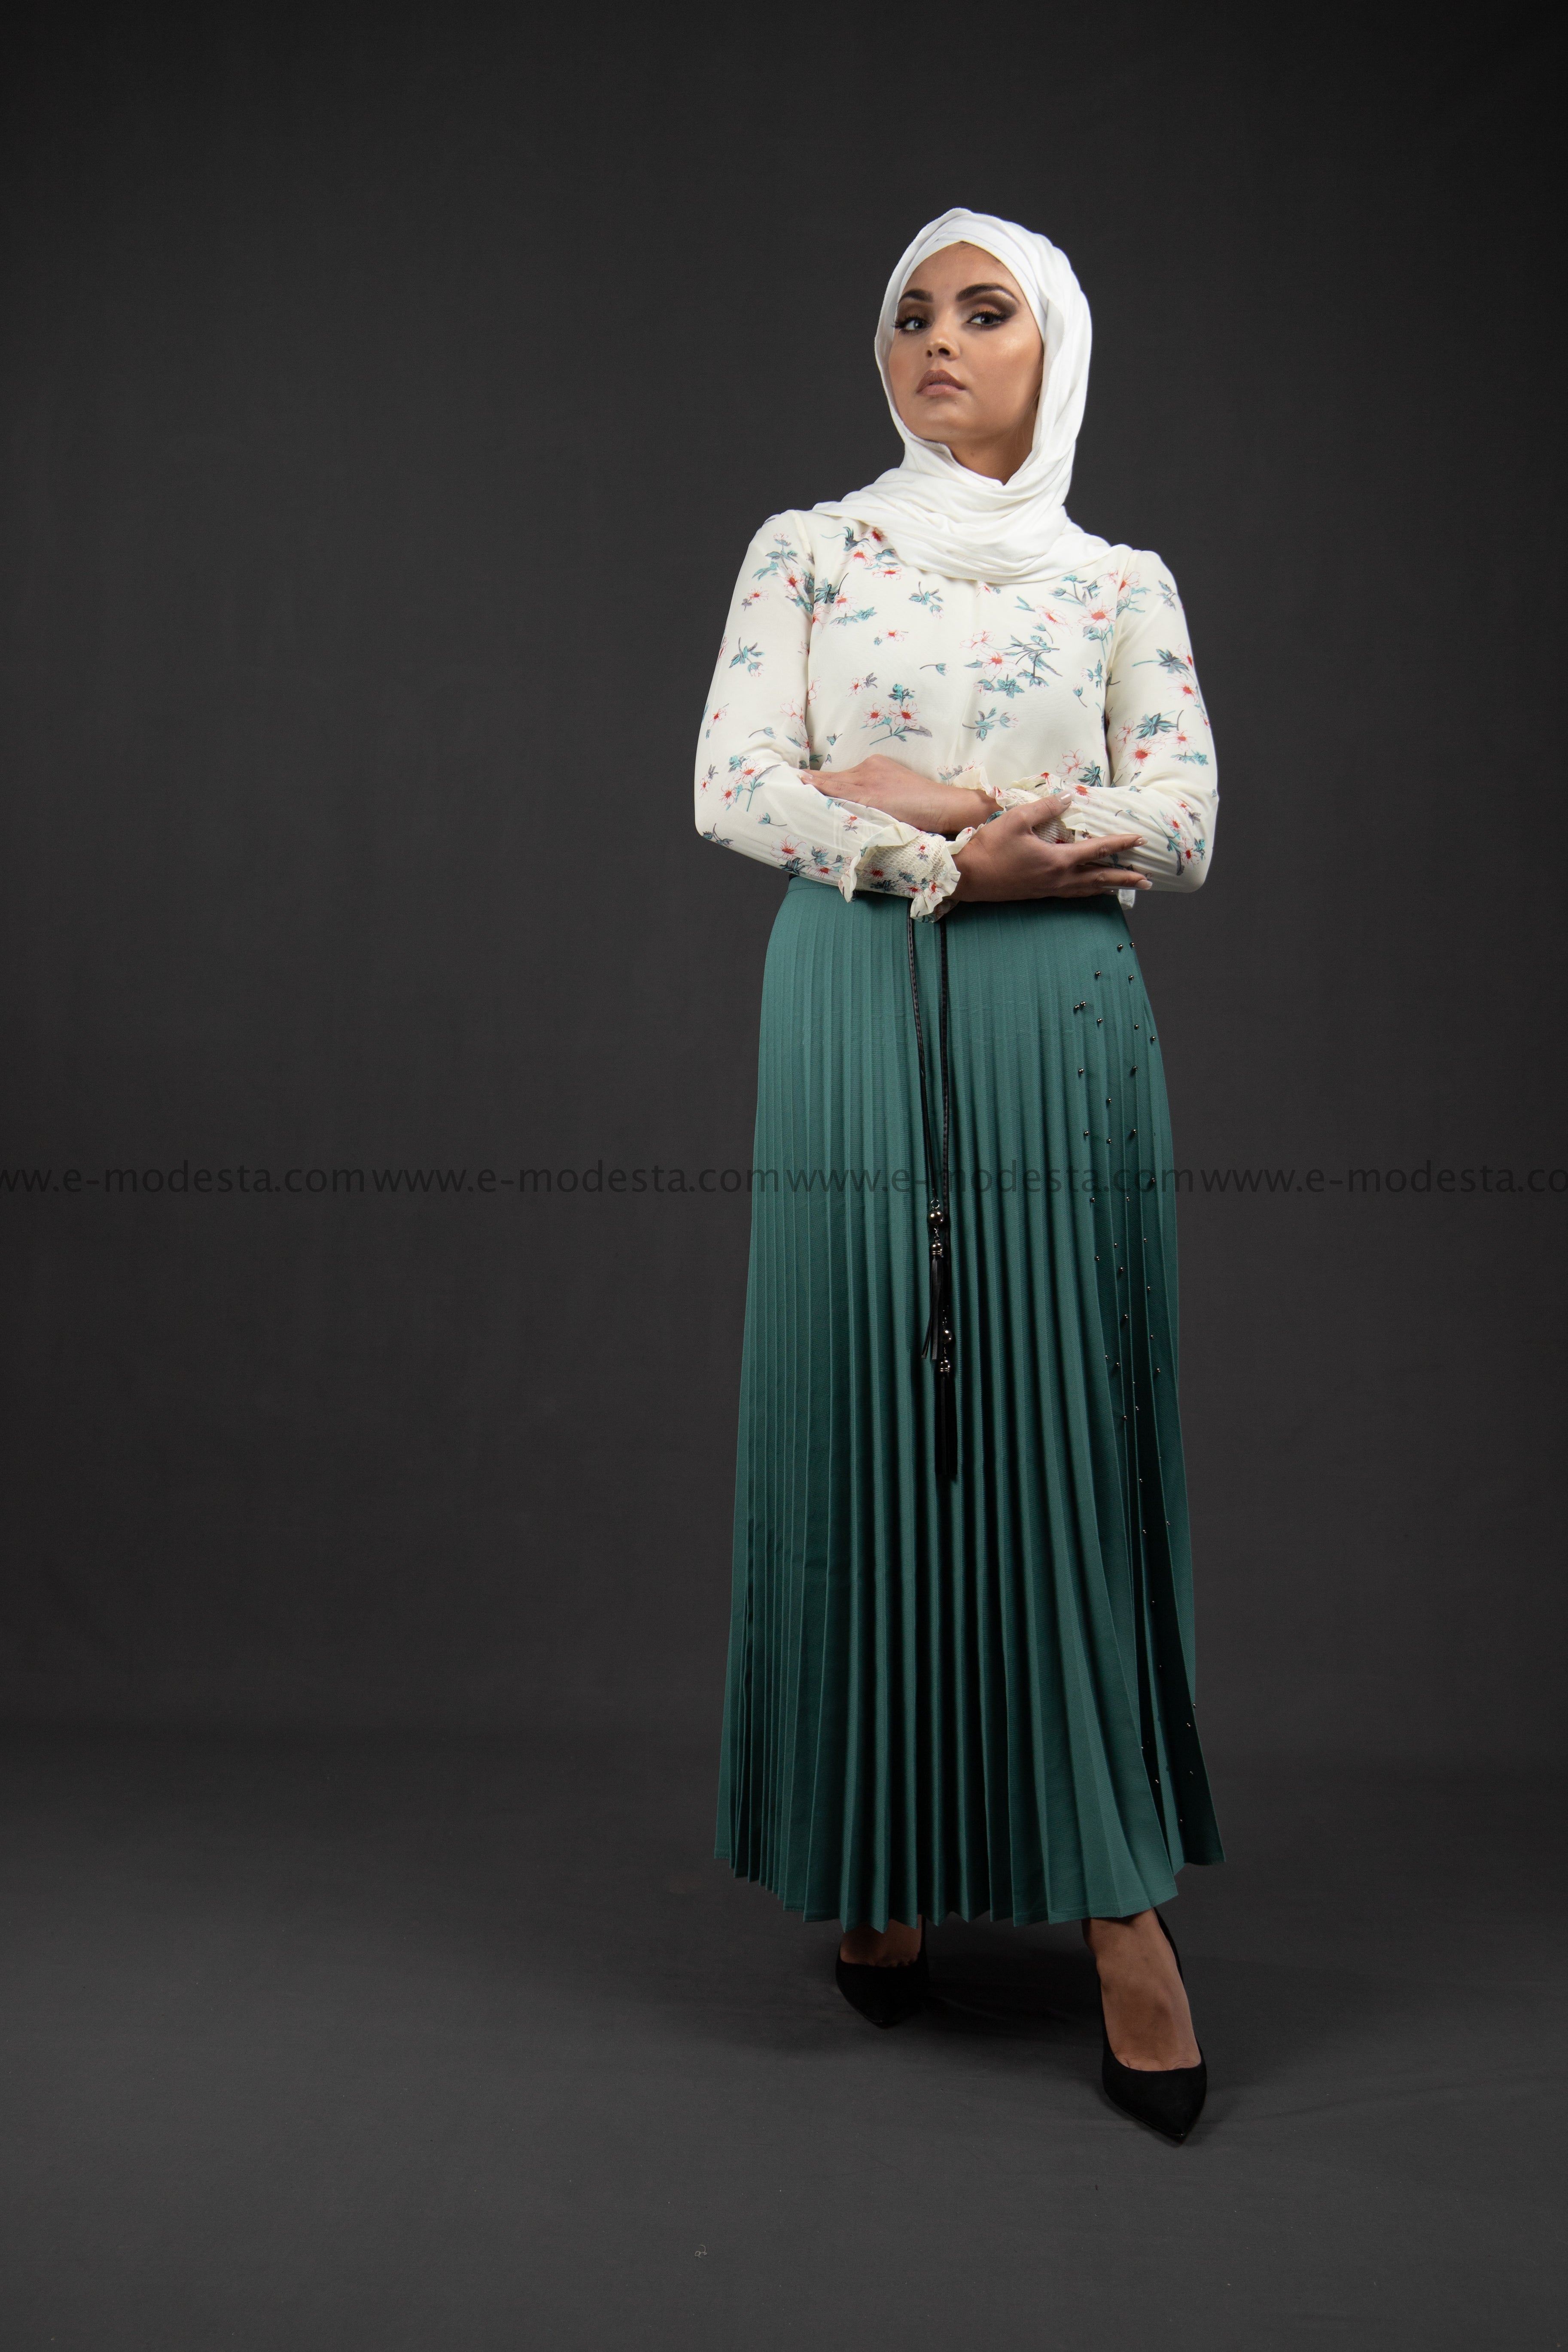 Pleated Maxi Skirt | Teal Blue Color | Pearls on One Side - E-Modesta